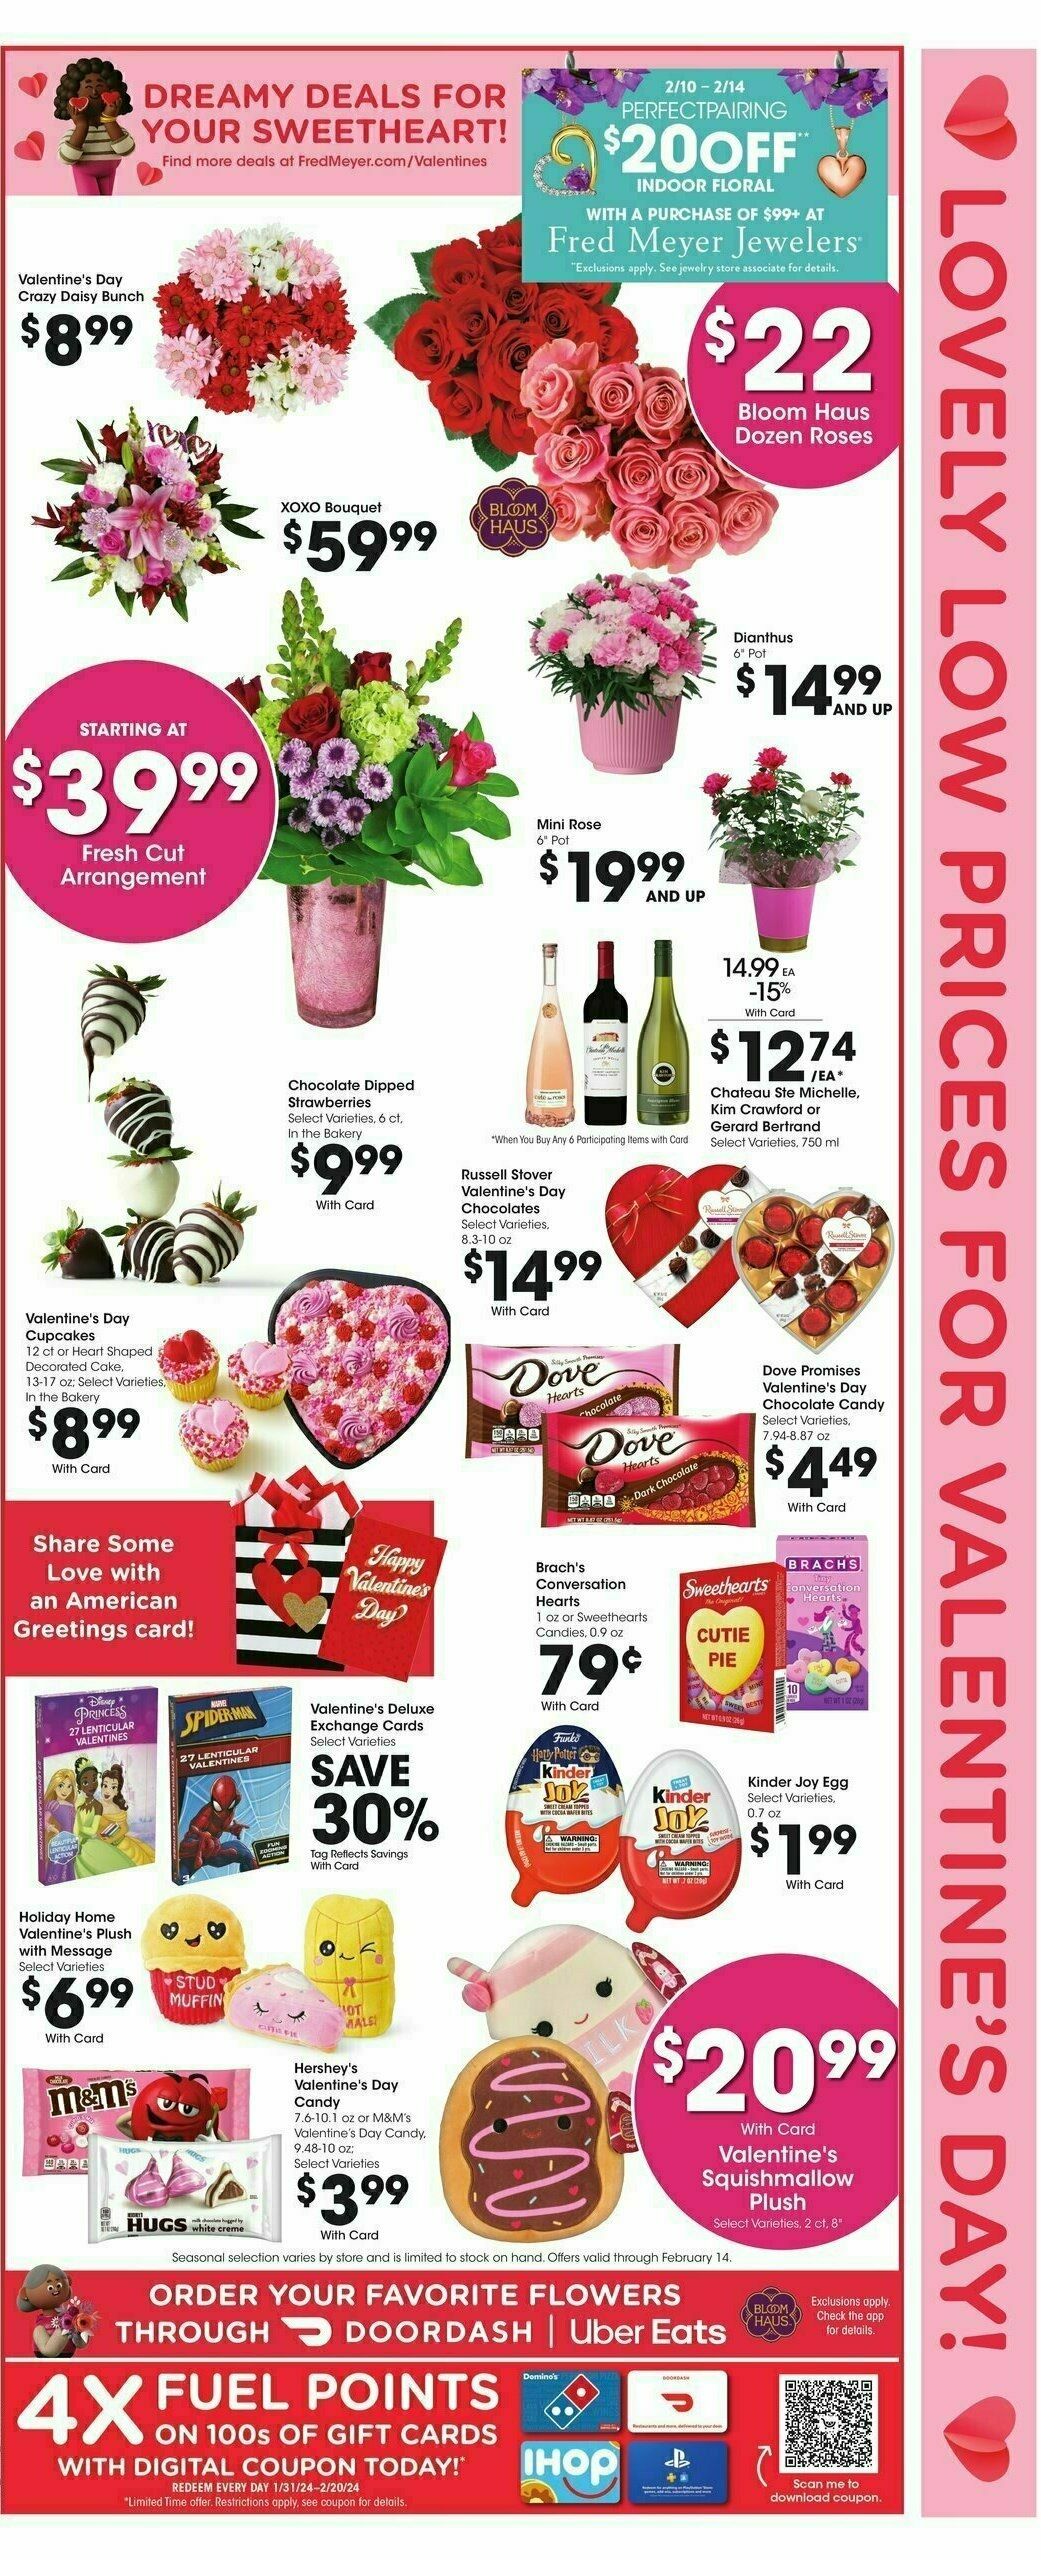 Fred Meyer Weekly Ad from February 7